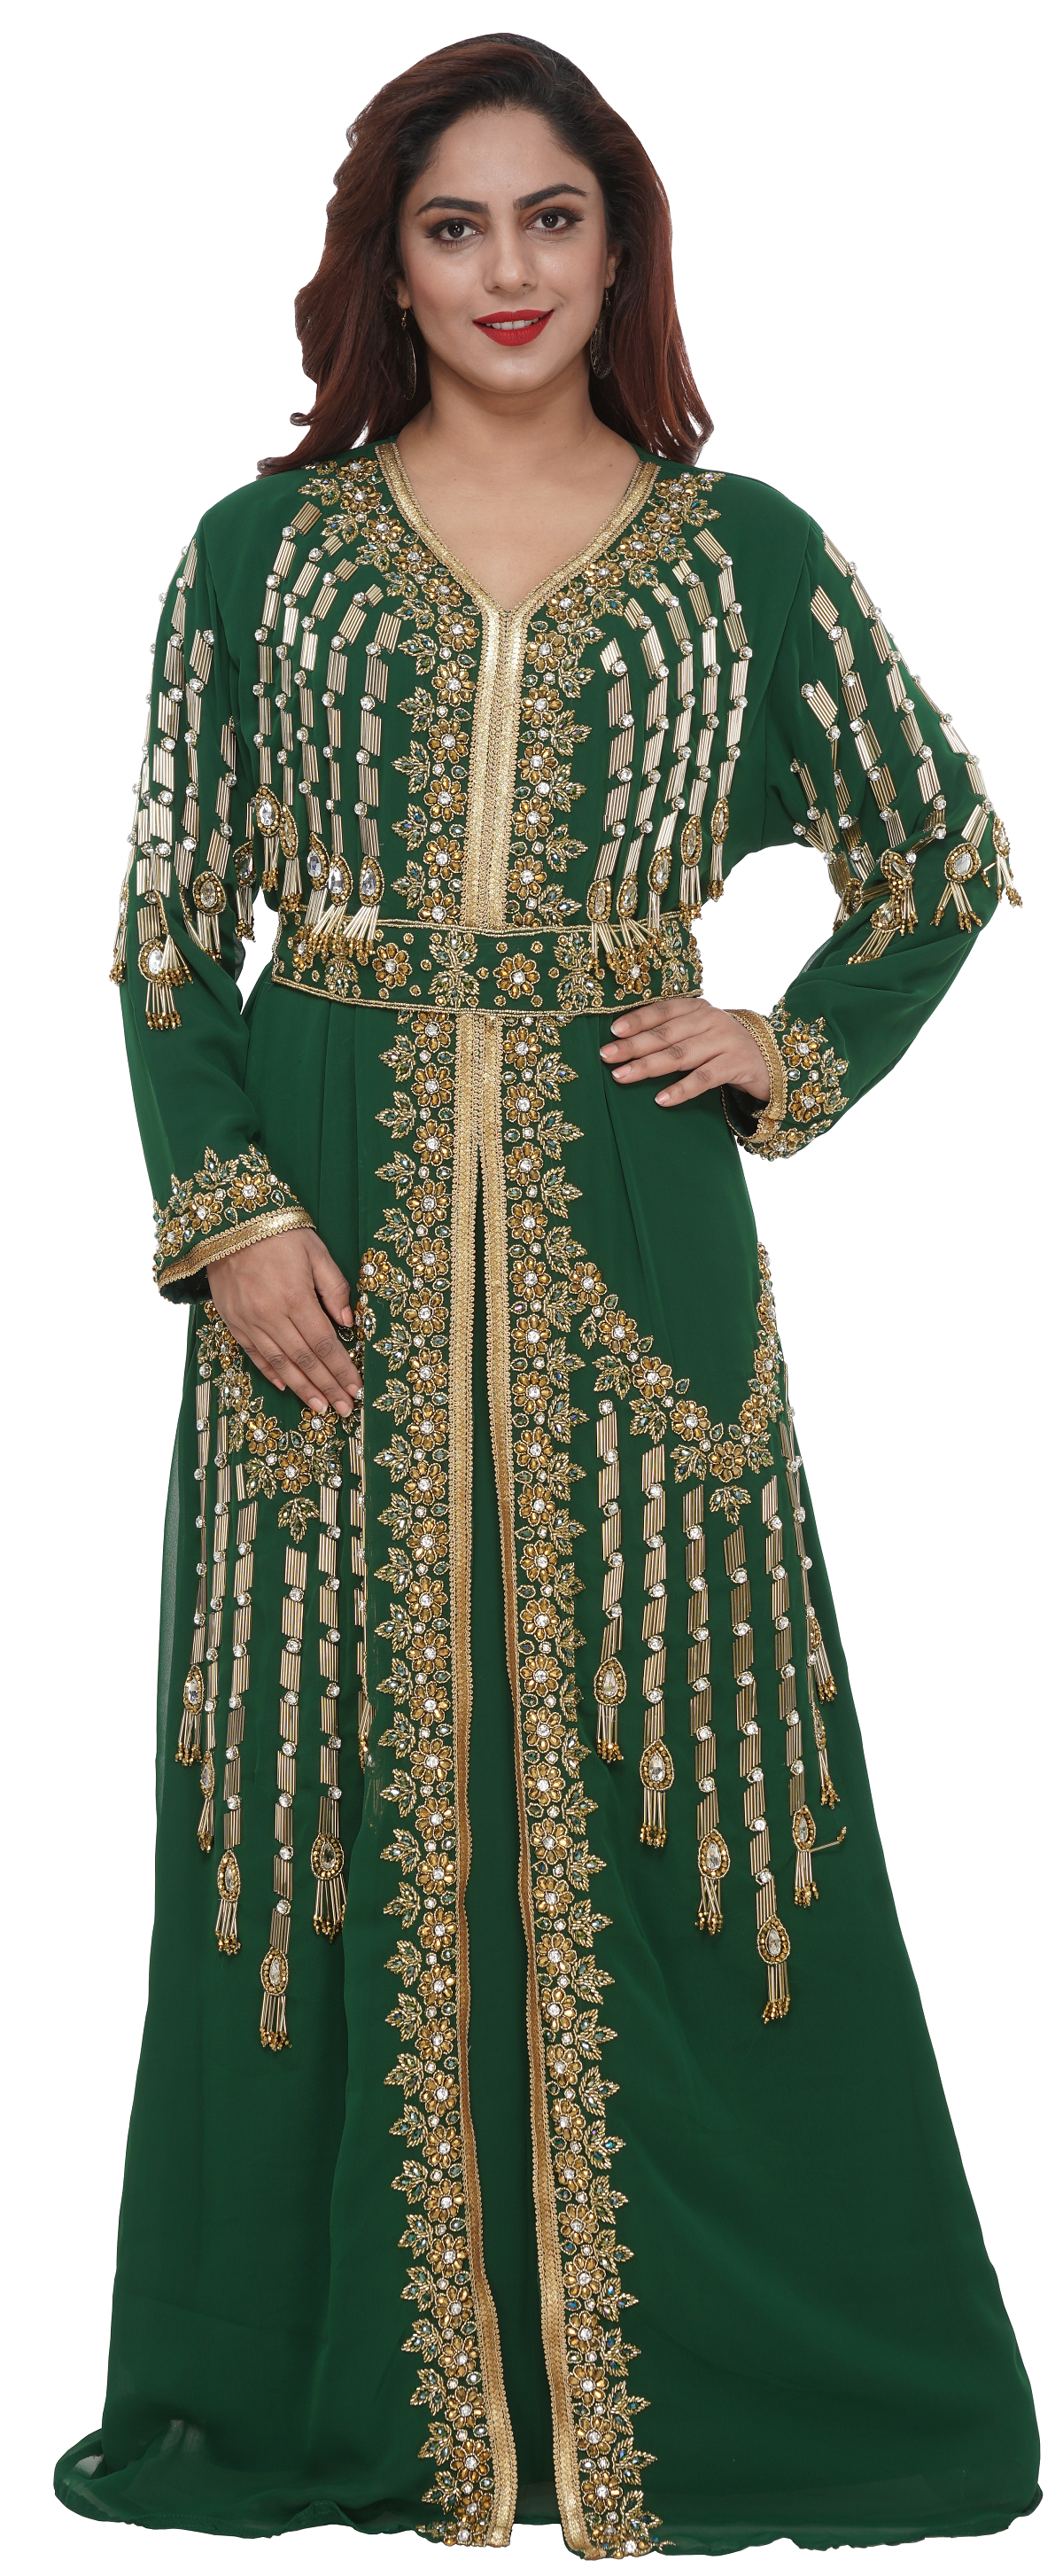 Henna Party Kaftan With Golden Floral Embroidery - Maxim Creation